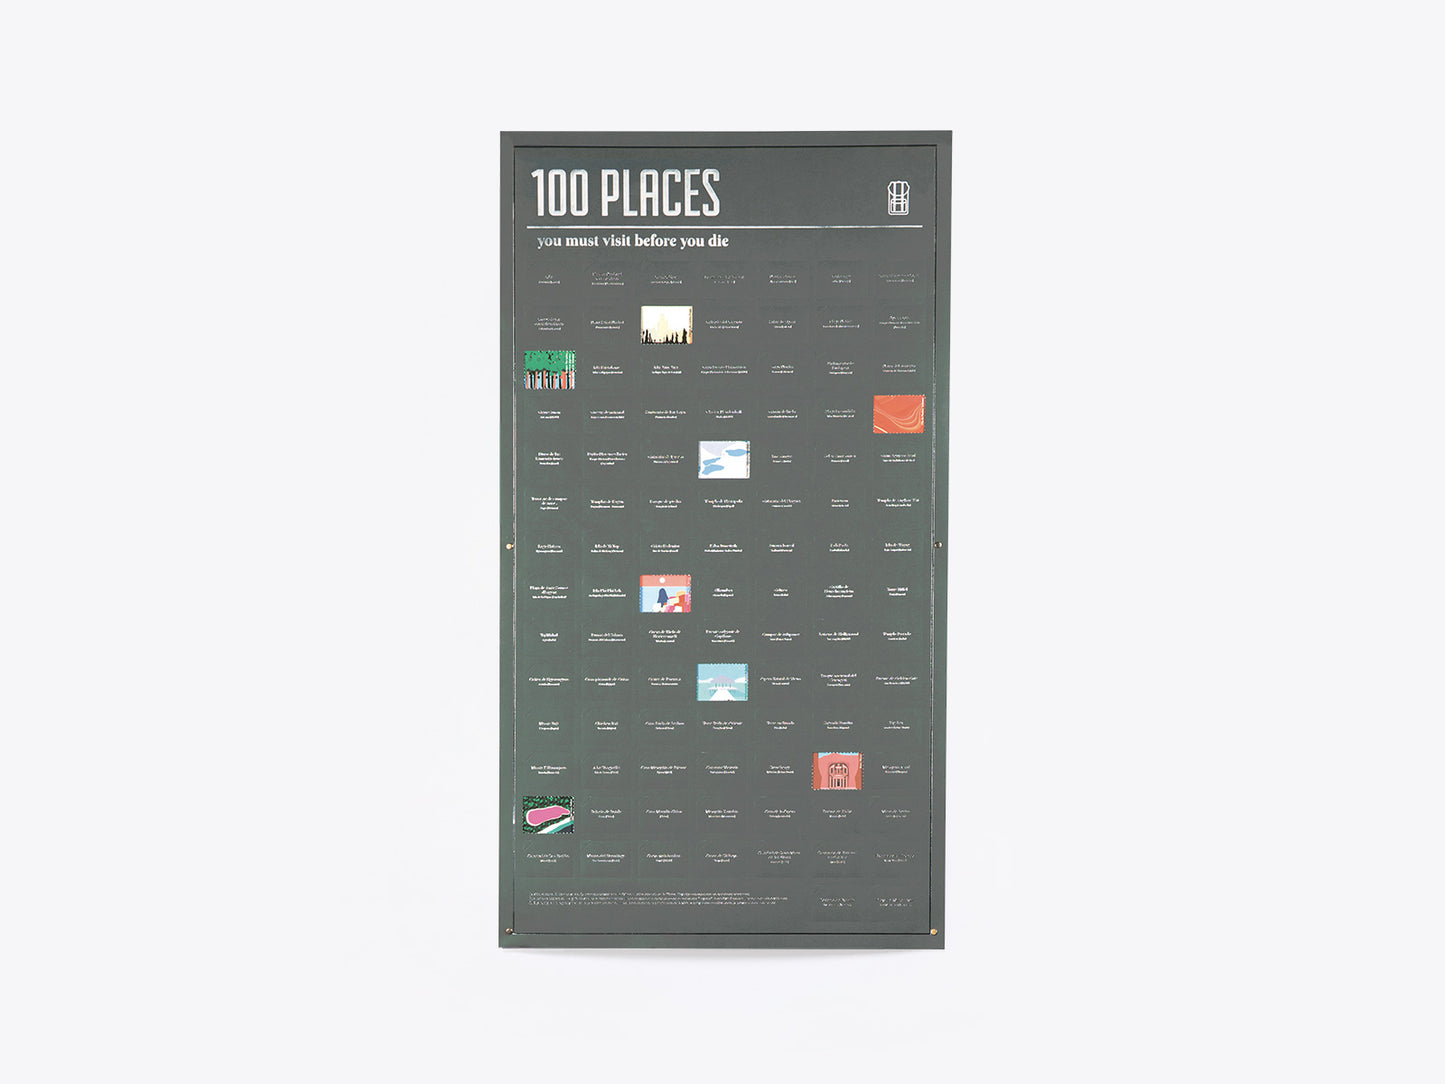 100 Places You Must Visit (Interactive Poster) from DOIY